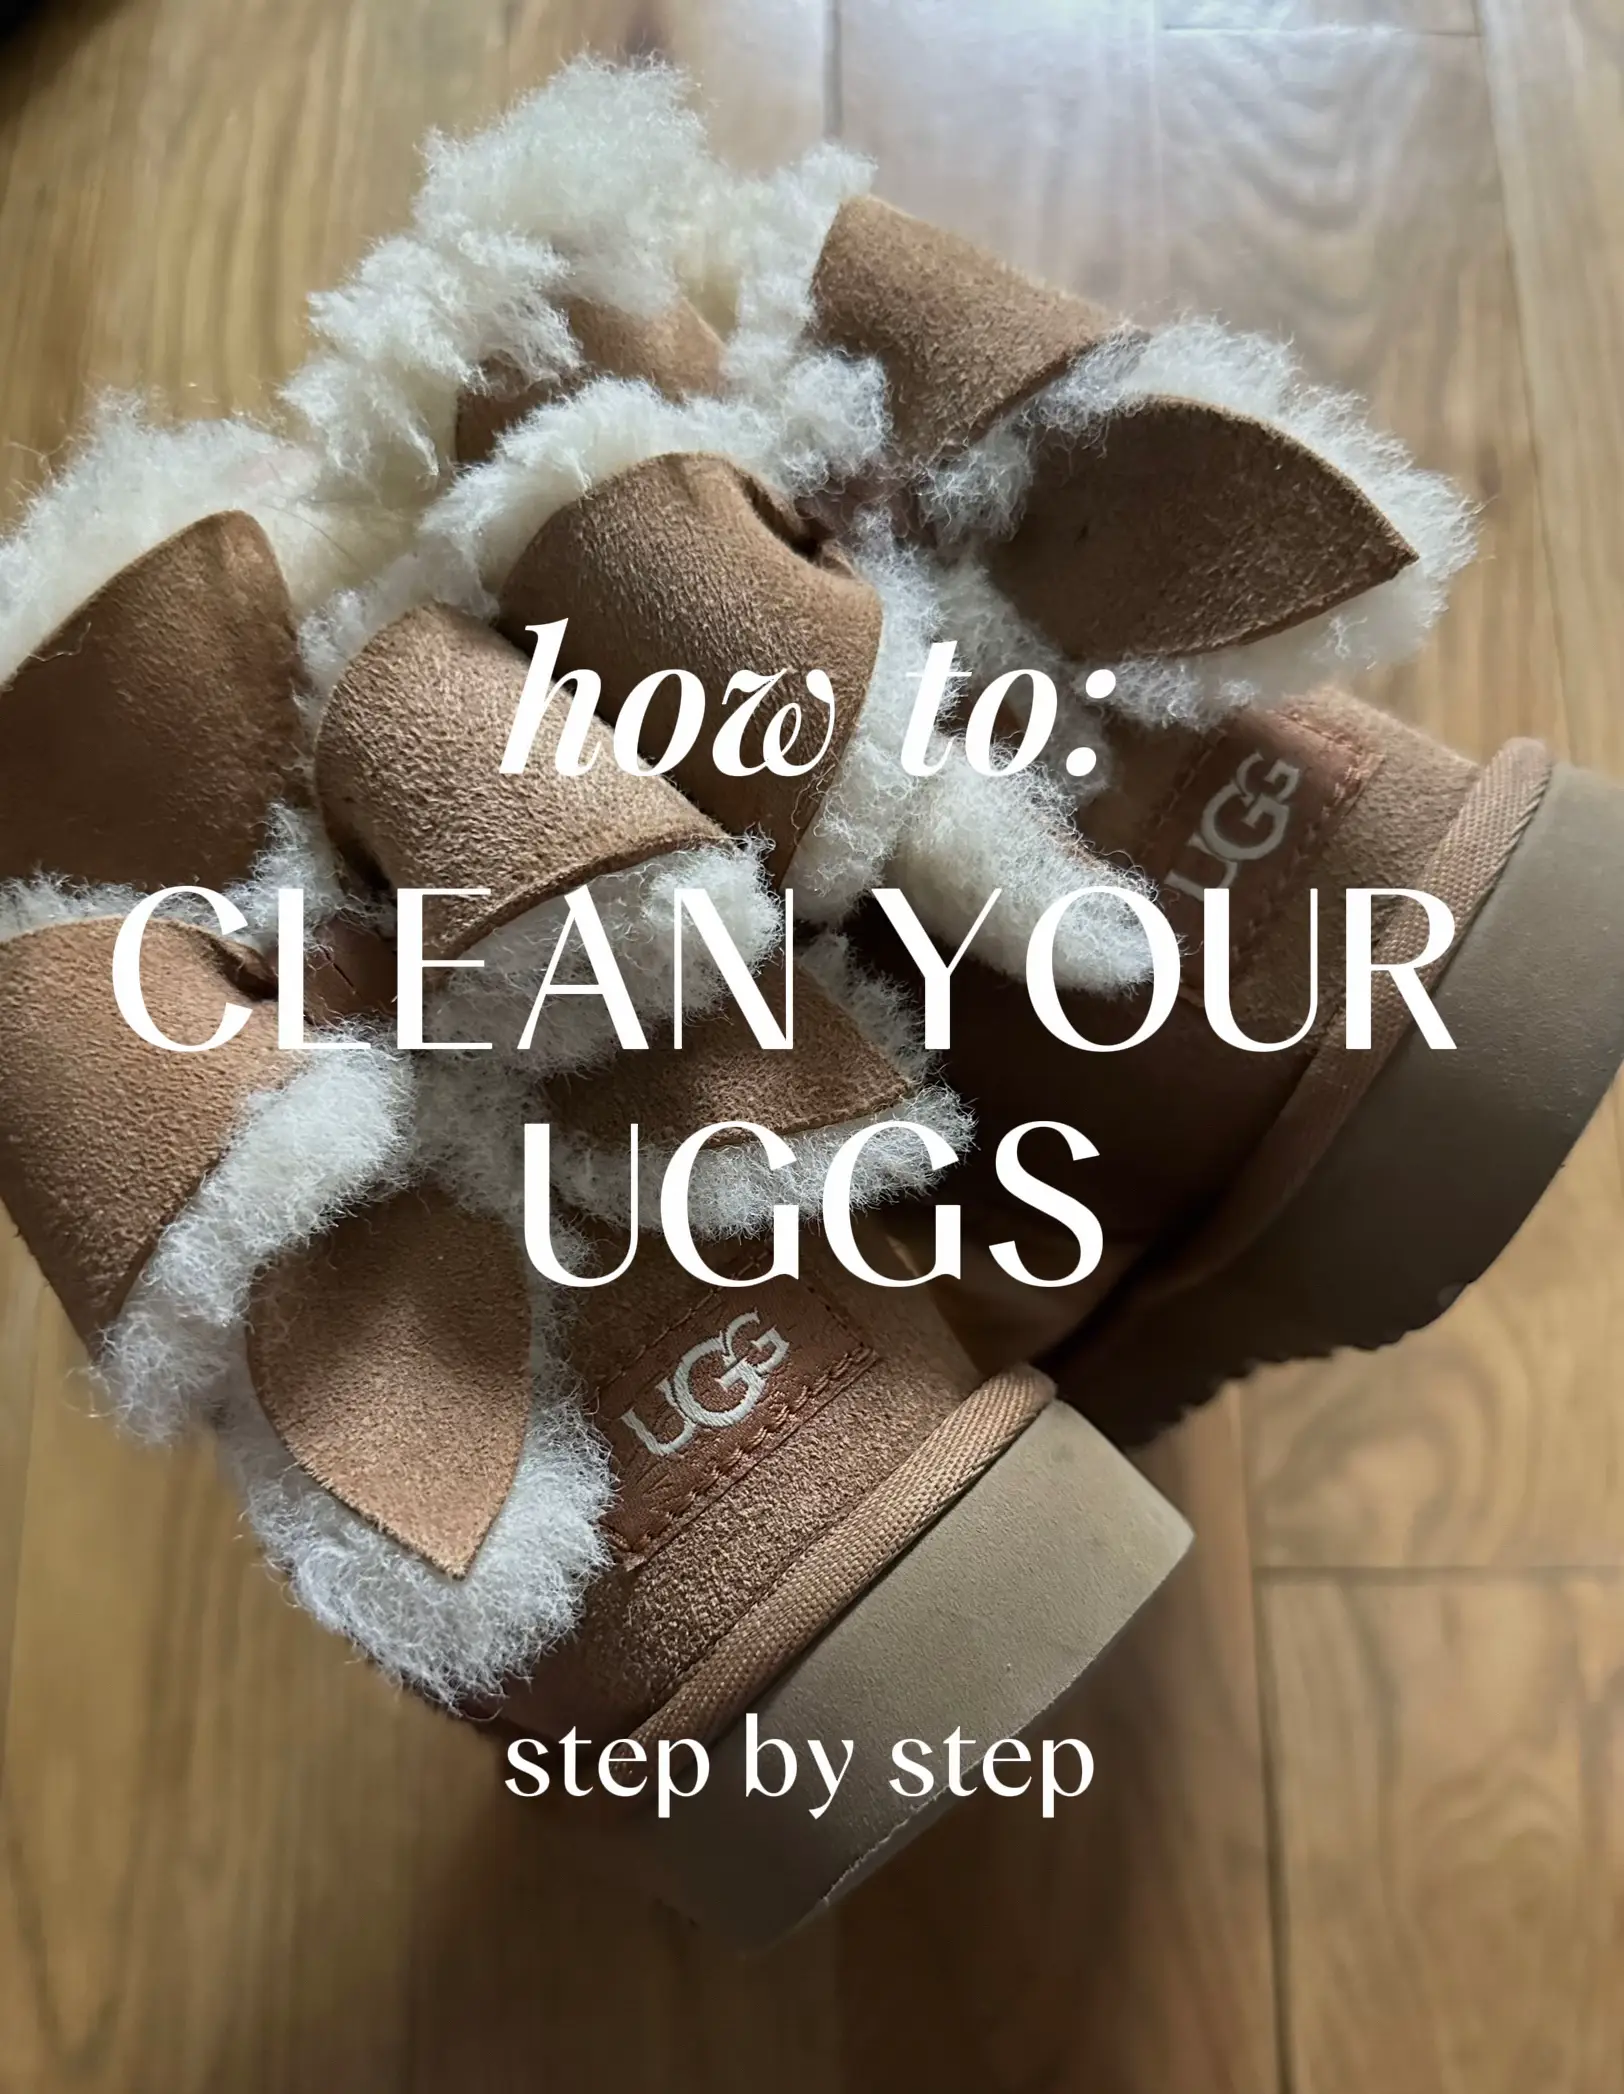 Step by step guide on how to clean UGGs